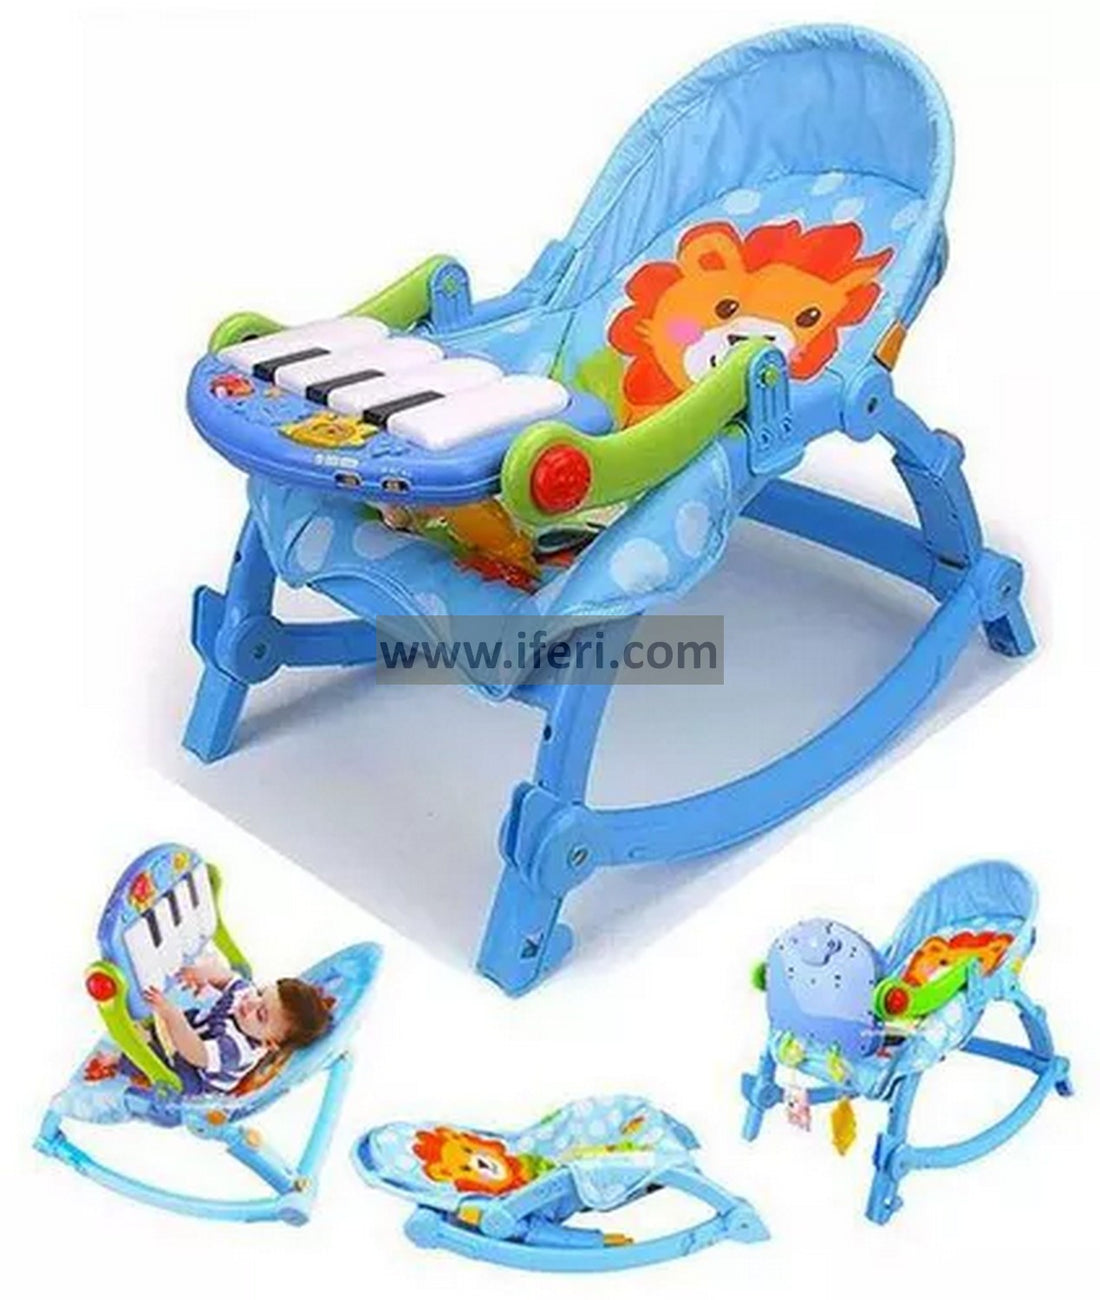 Buy Baby Pedal Gym Chair with Rocker from iferi.com in Bangladesh